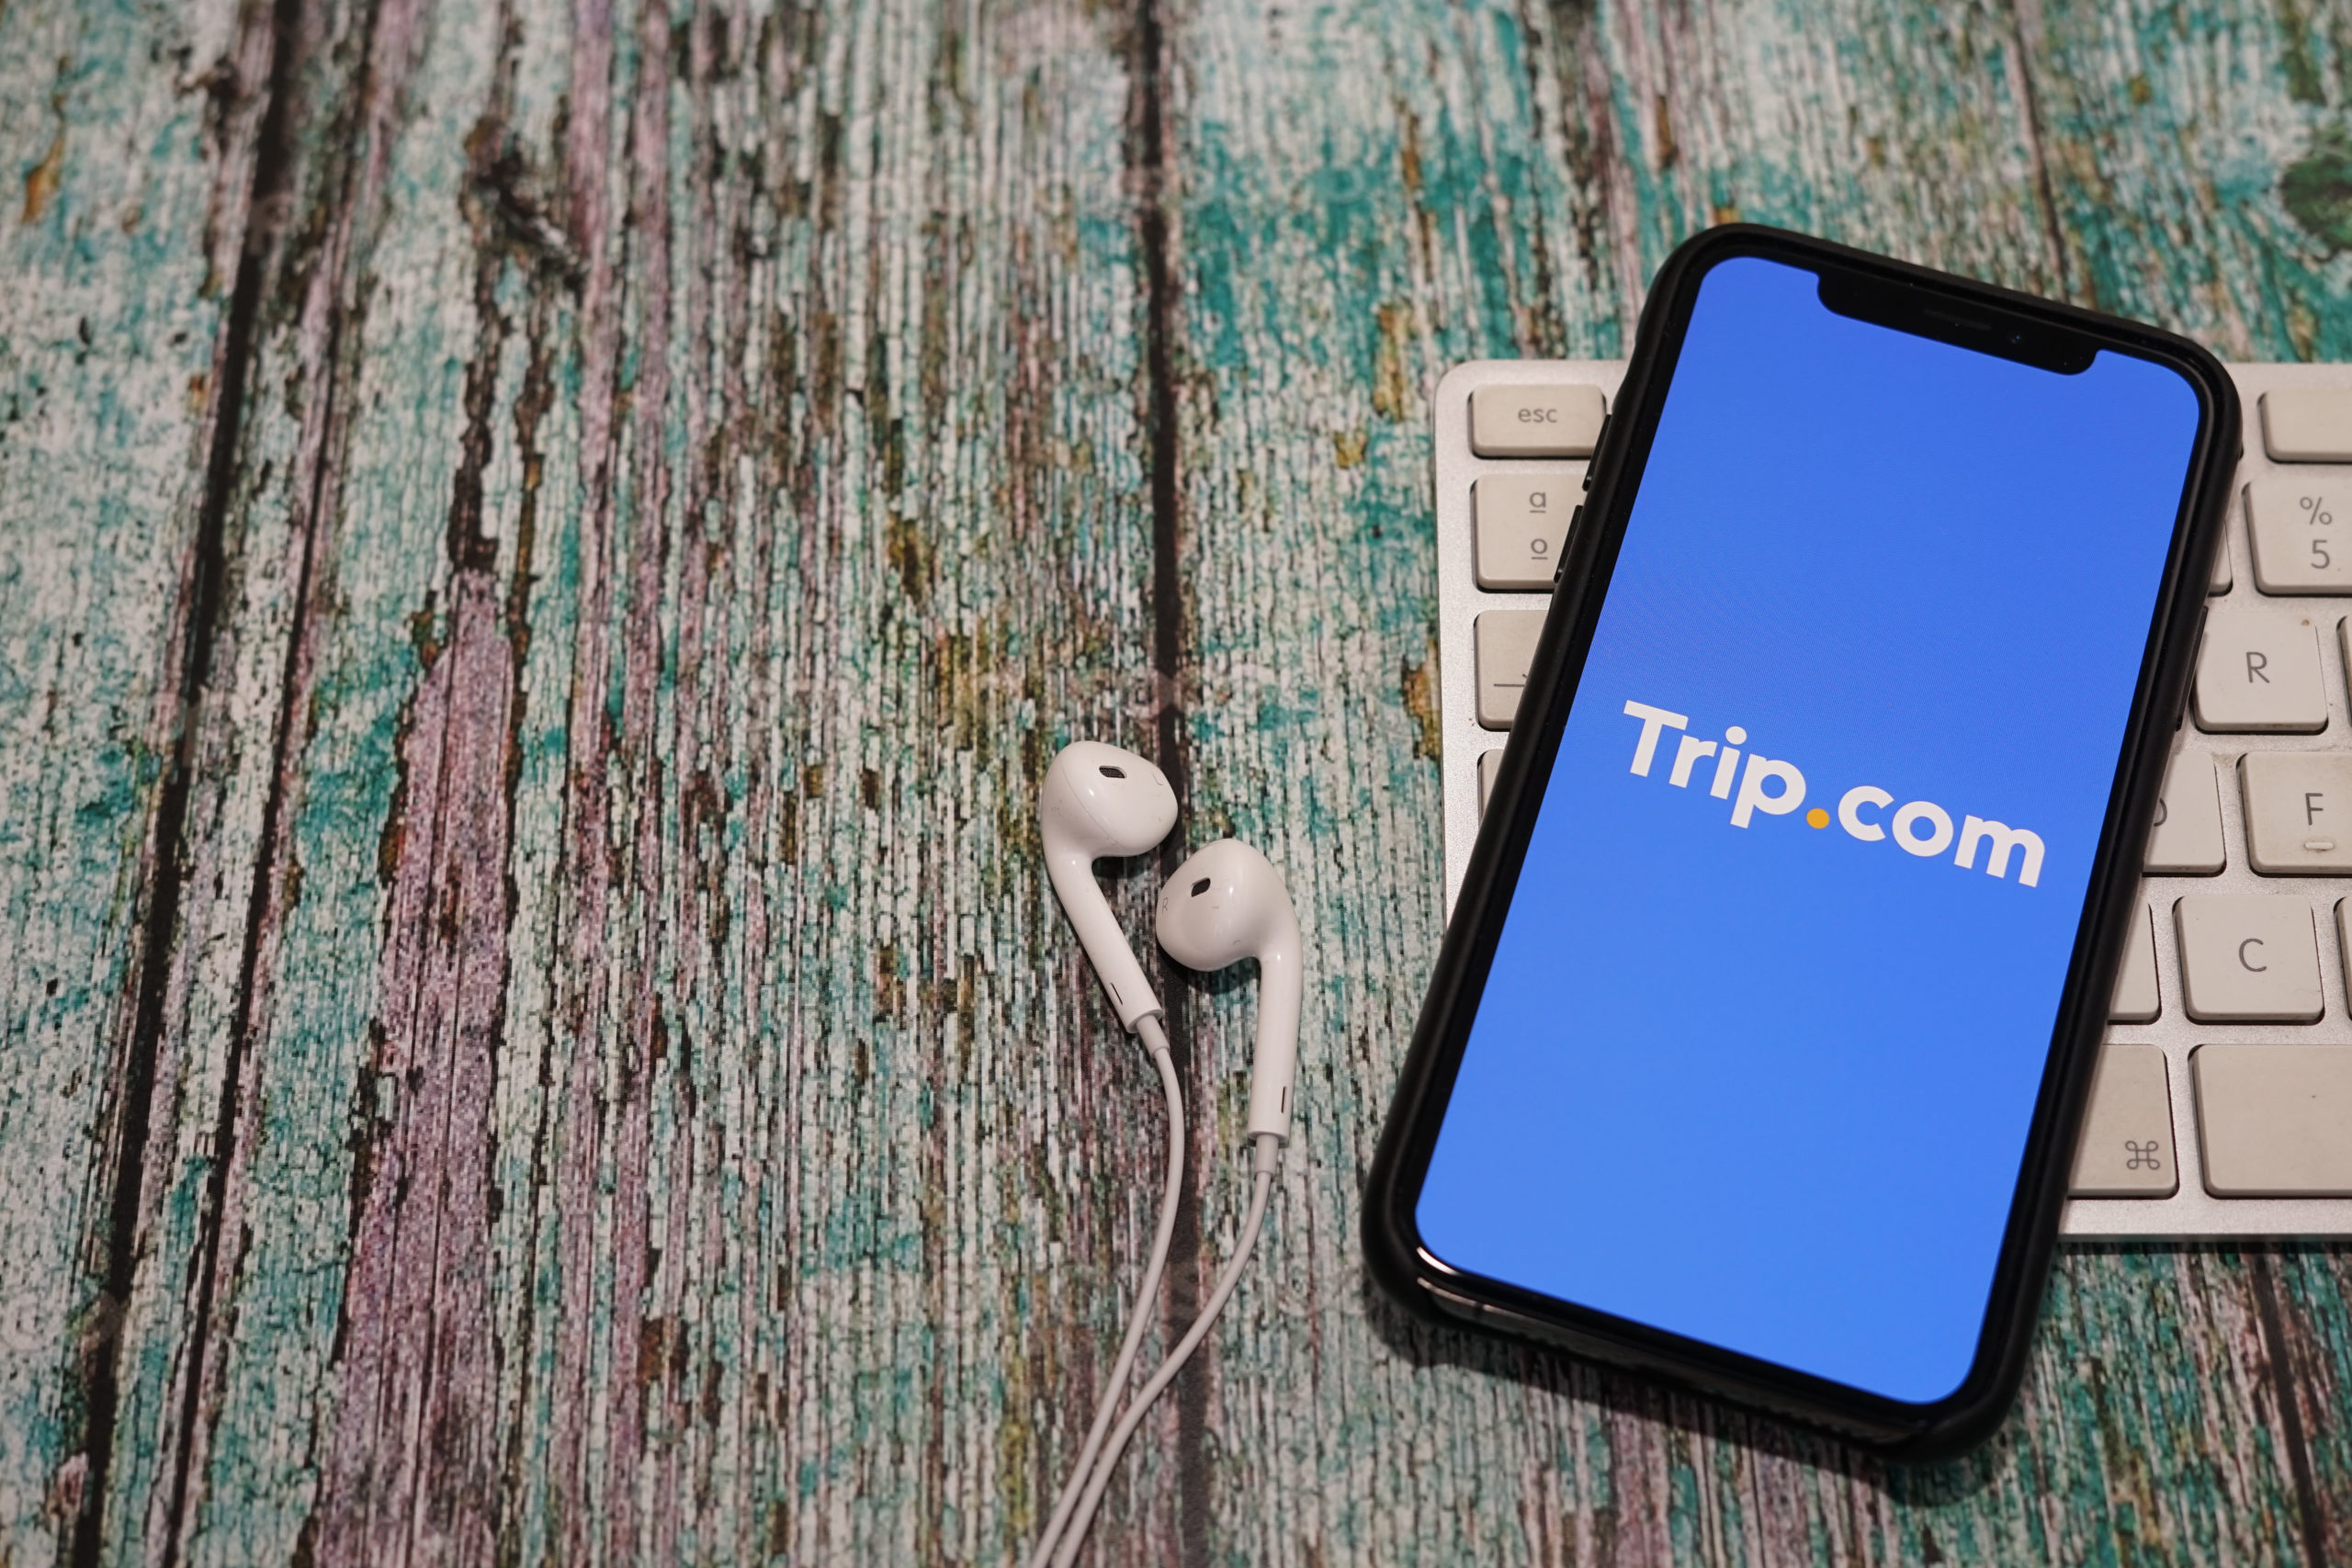 Trip.com’s revenue decline slows in Q4, as it expects a strong travel rebound